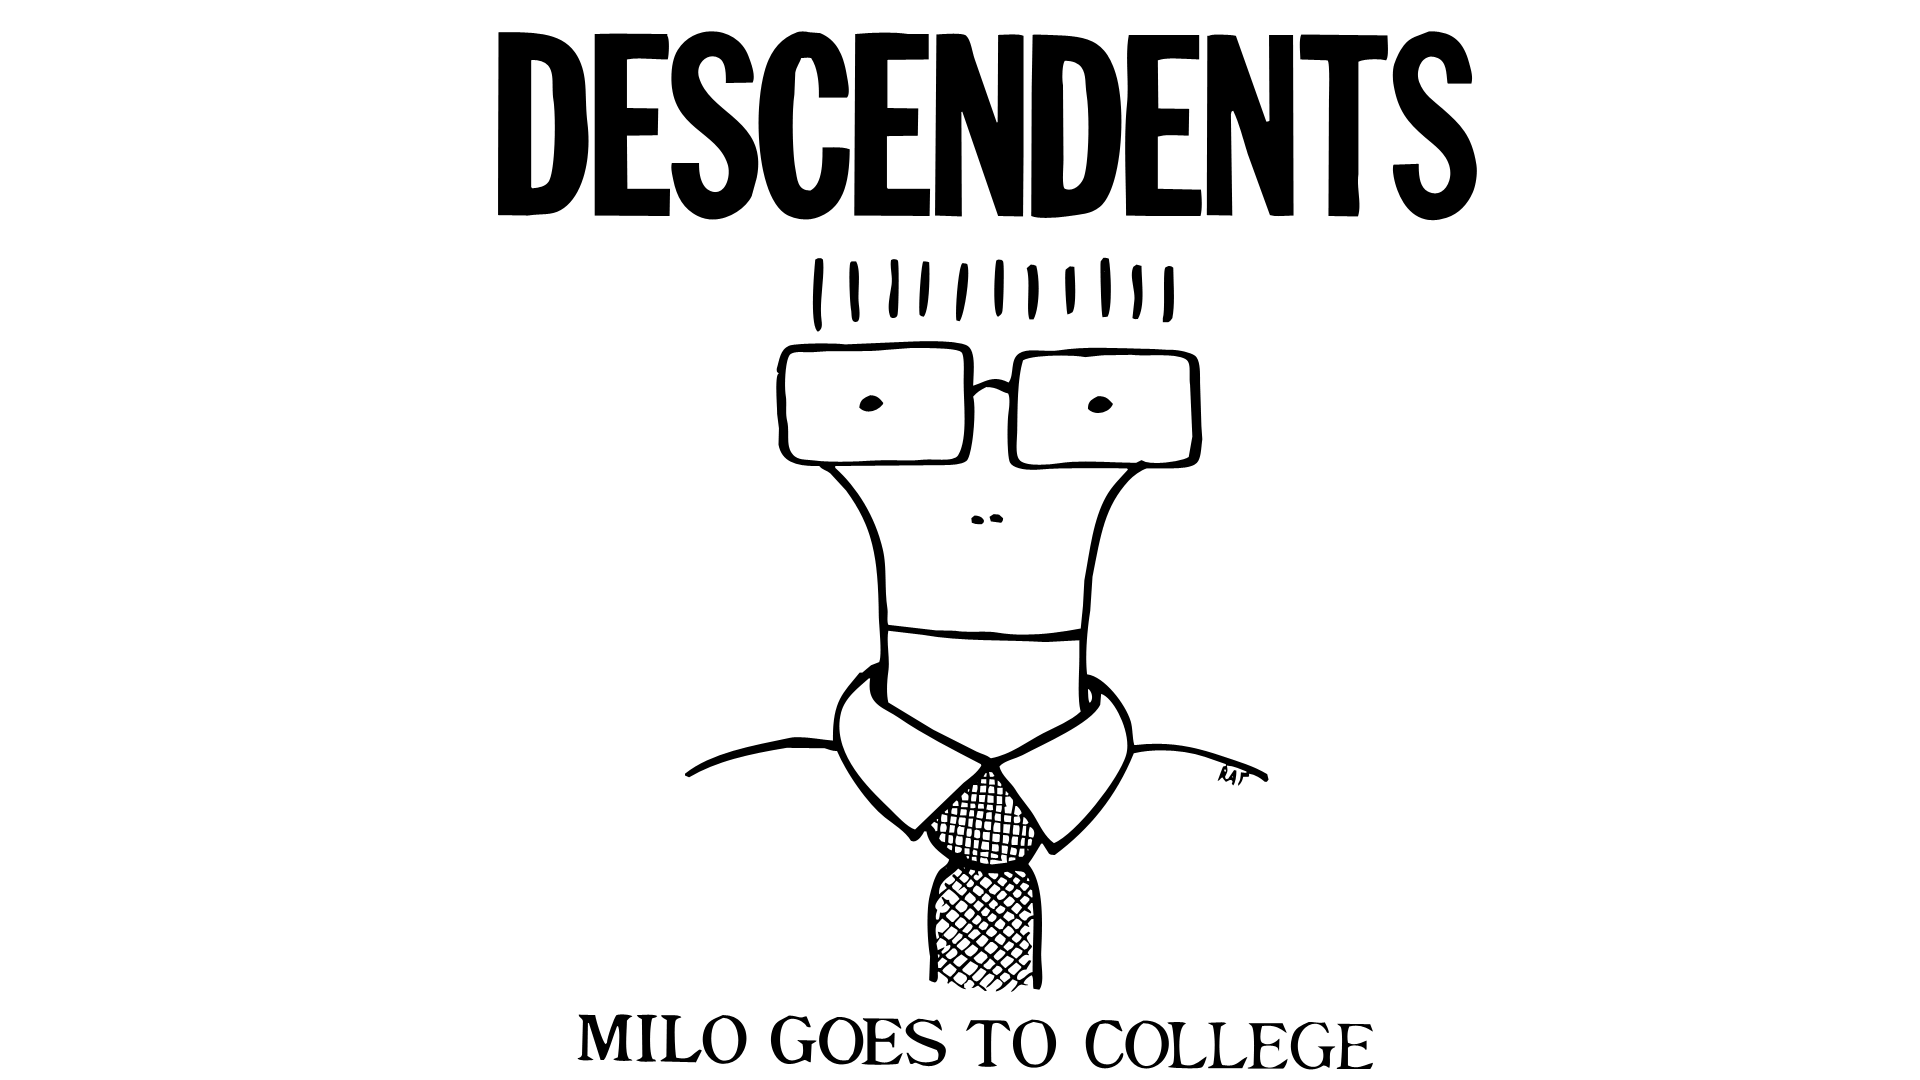 General 1920x1080 music album covers Descendents white background simple background typography